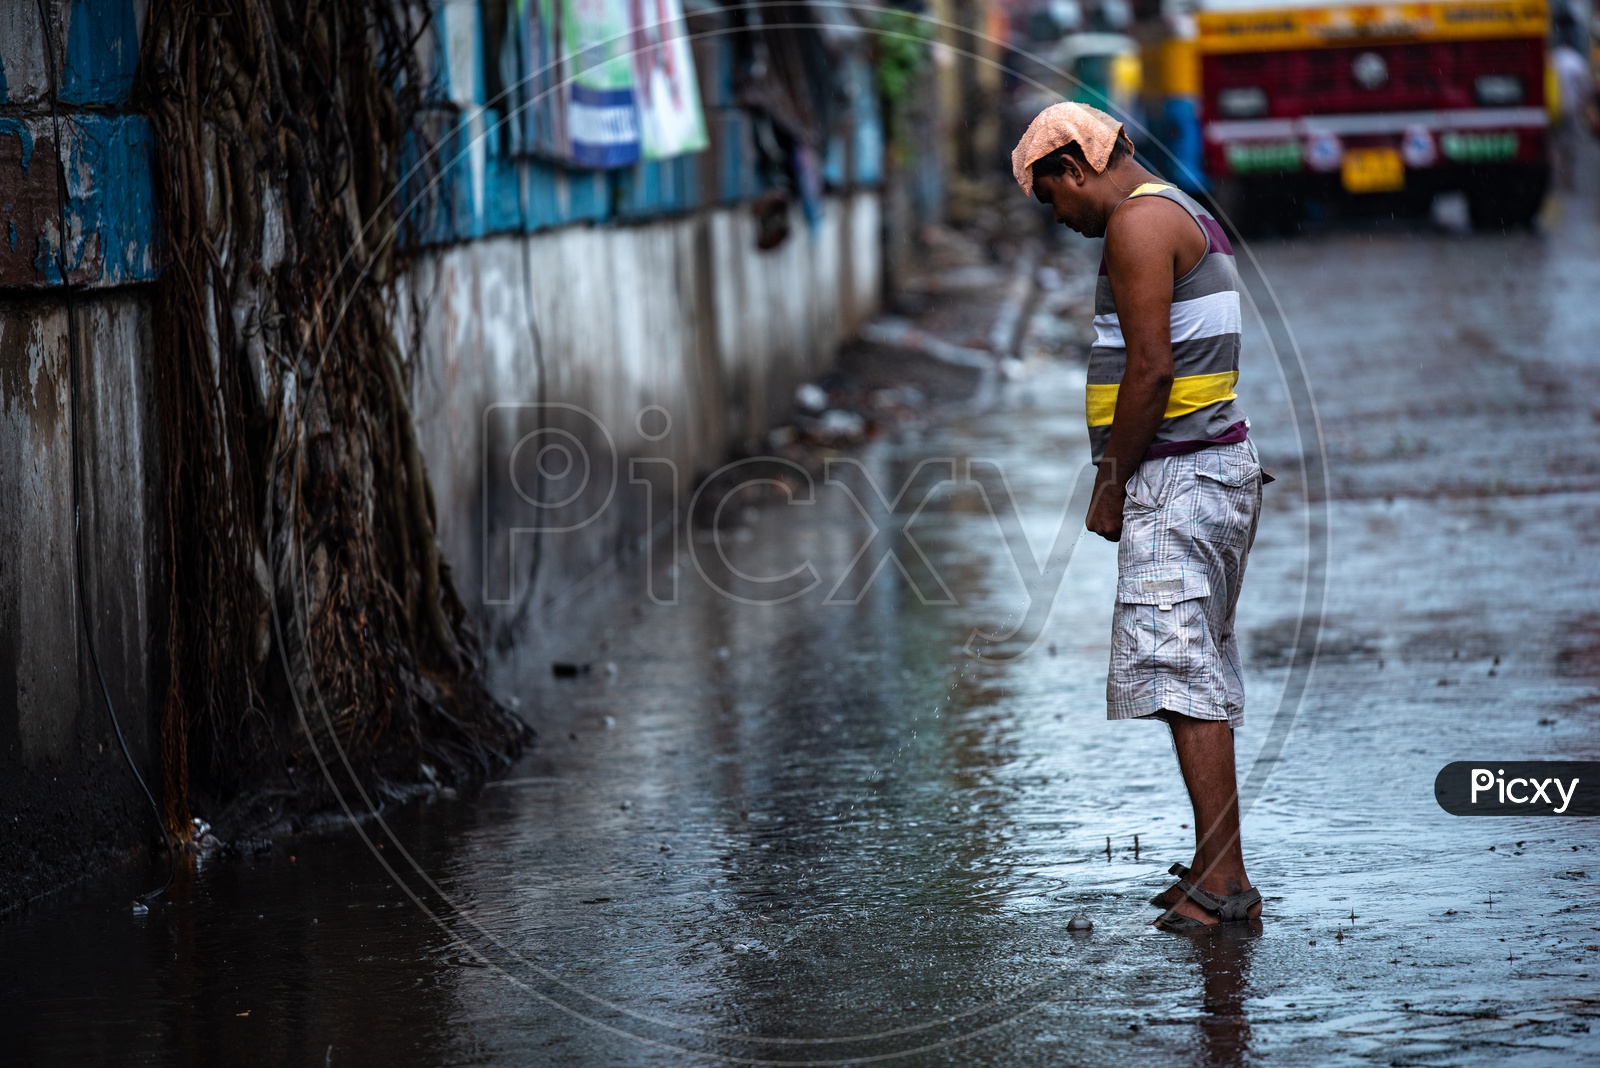 A Man peeing/public urination  on Over Flooded Roads in  Kolkata Due To Cyclone Fani